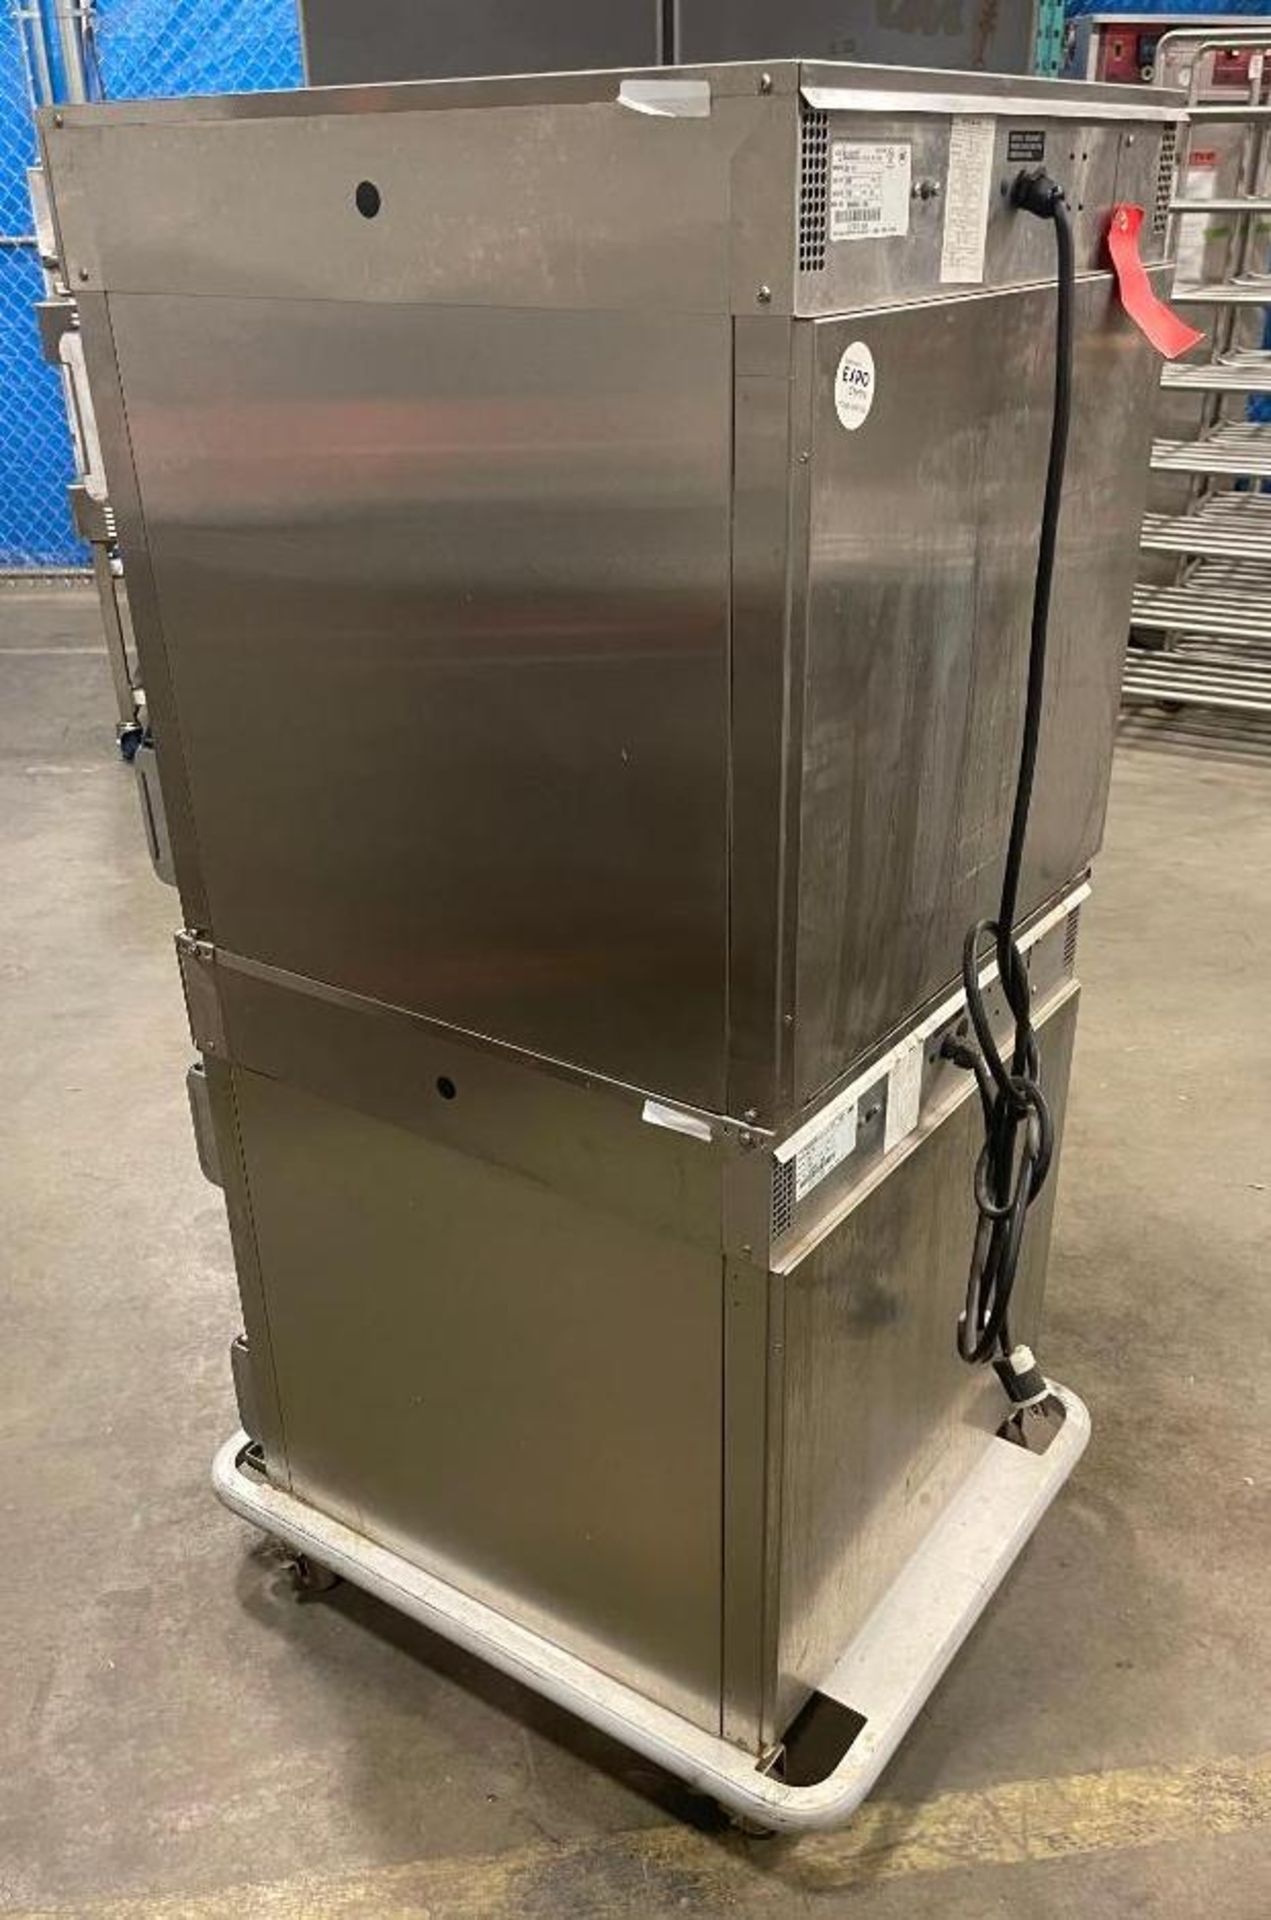 DOUBLE STACKED ALTO-SHAAM 750-TH-II COOK AND HOLD OVEN - Image 6 of 25